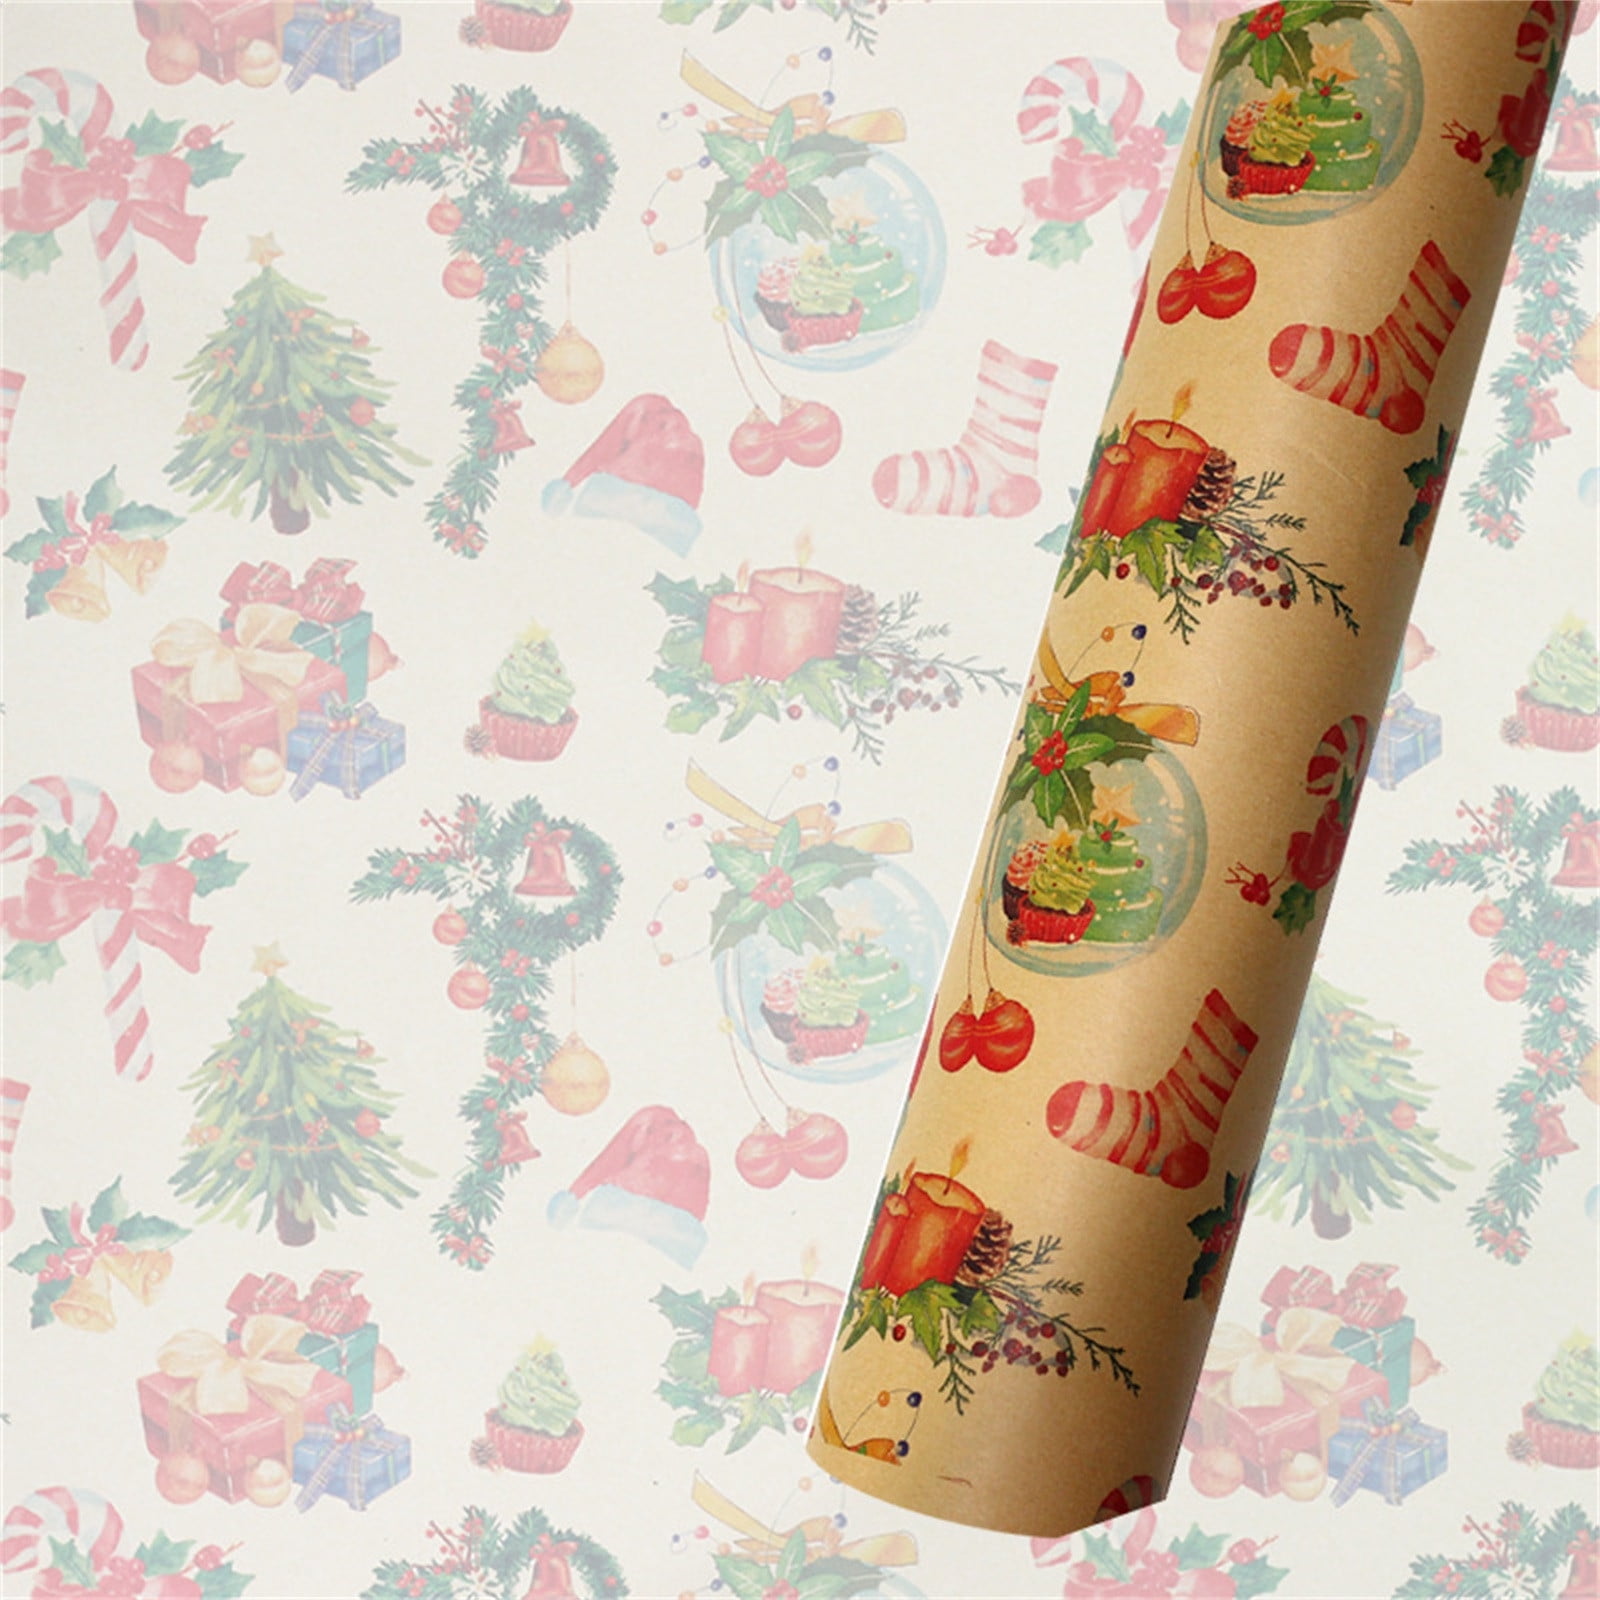 Vikakiooze Christmas Wrapping Paper Clearance, Valentines Wrapping Paper,  Christmas Packaging Decorative Paper, Gift Wrapping Paper for Gift Bags,  Flower, Valentines Decor 